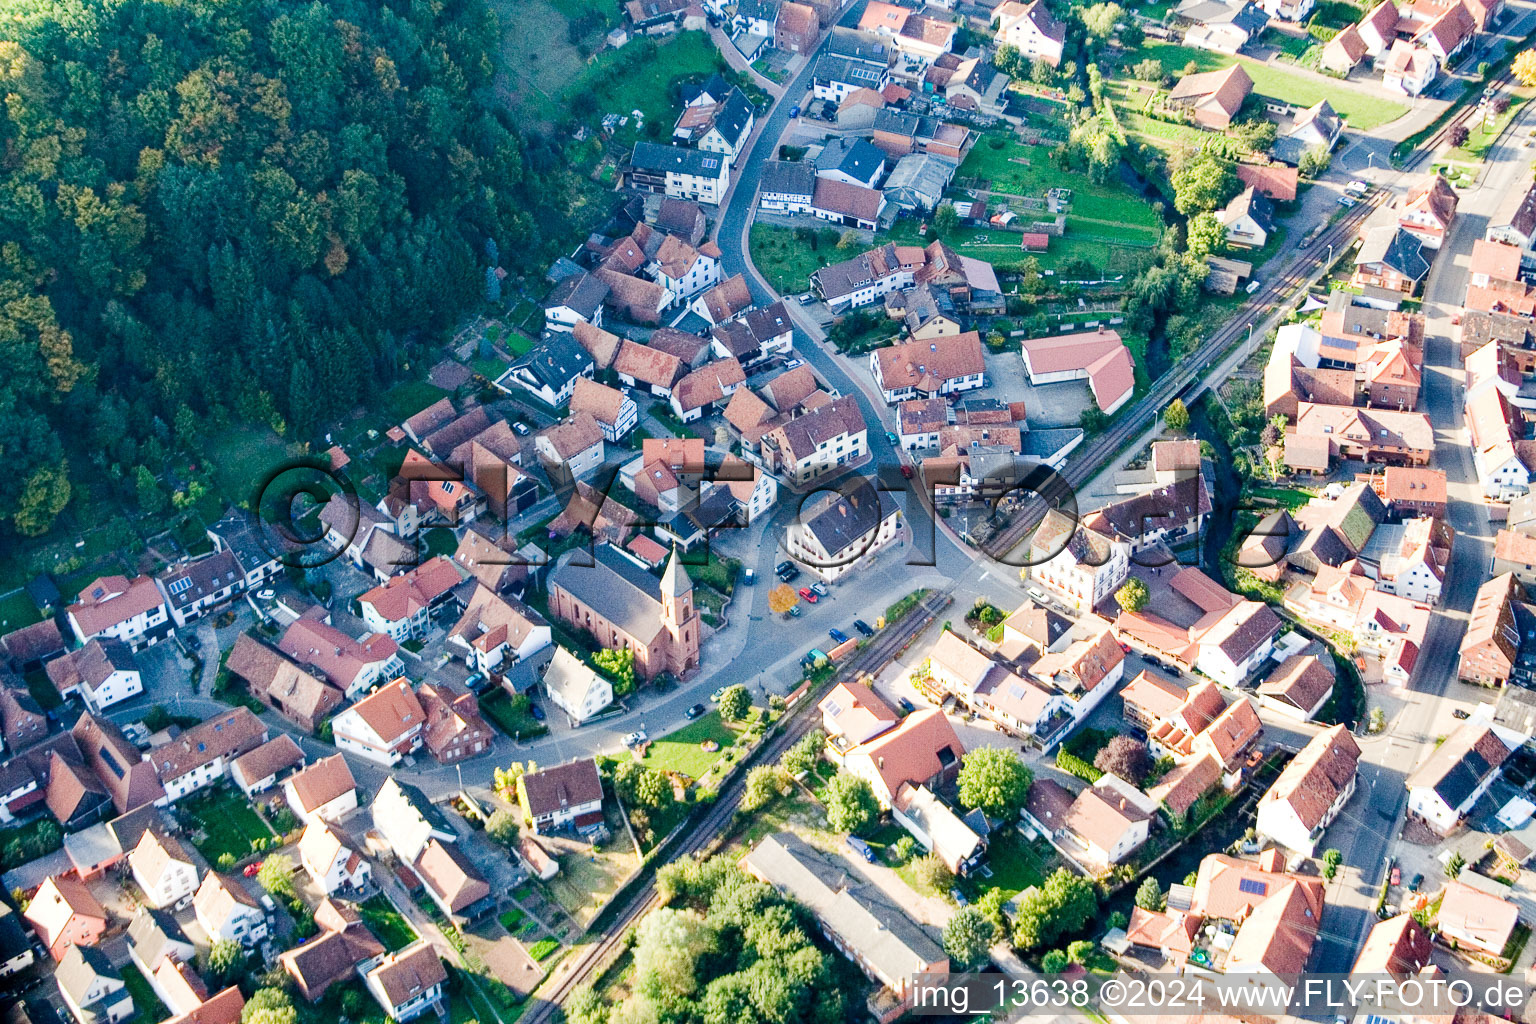 Aerial view of Town View of the streets and houses of the residential areas in Bruchweiler-Baerenbach in the state Rhineland-Palatinate